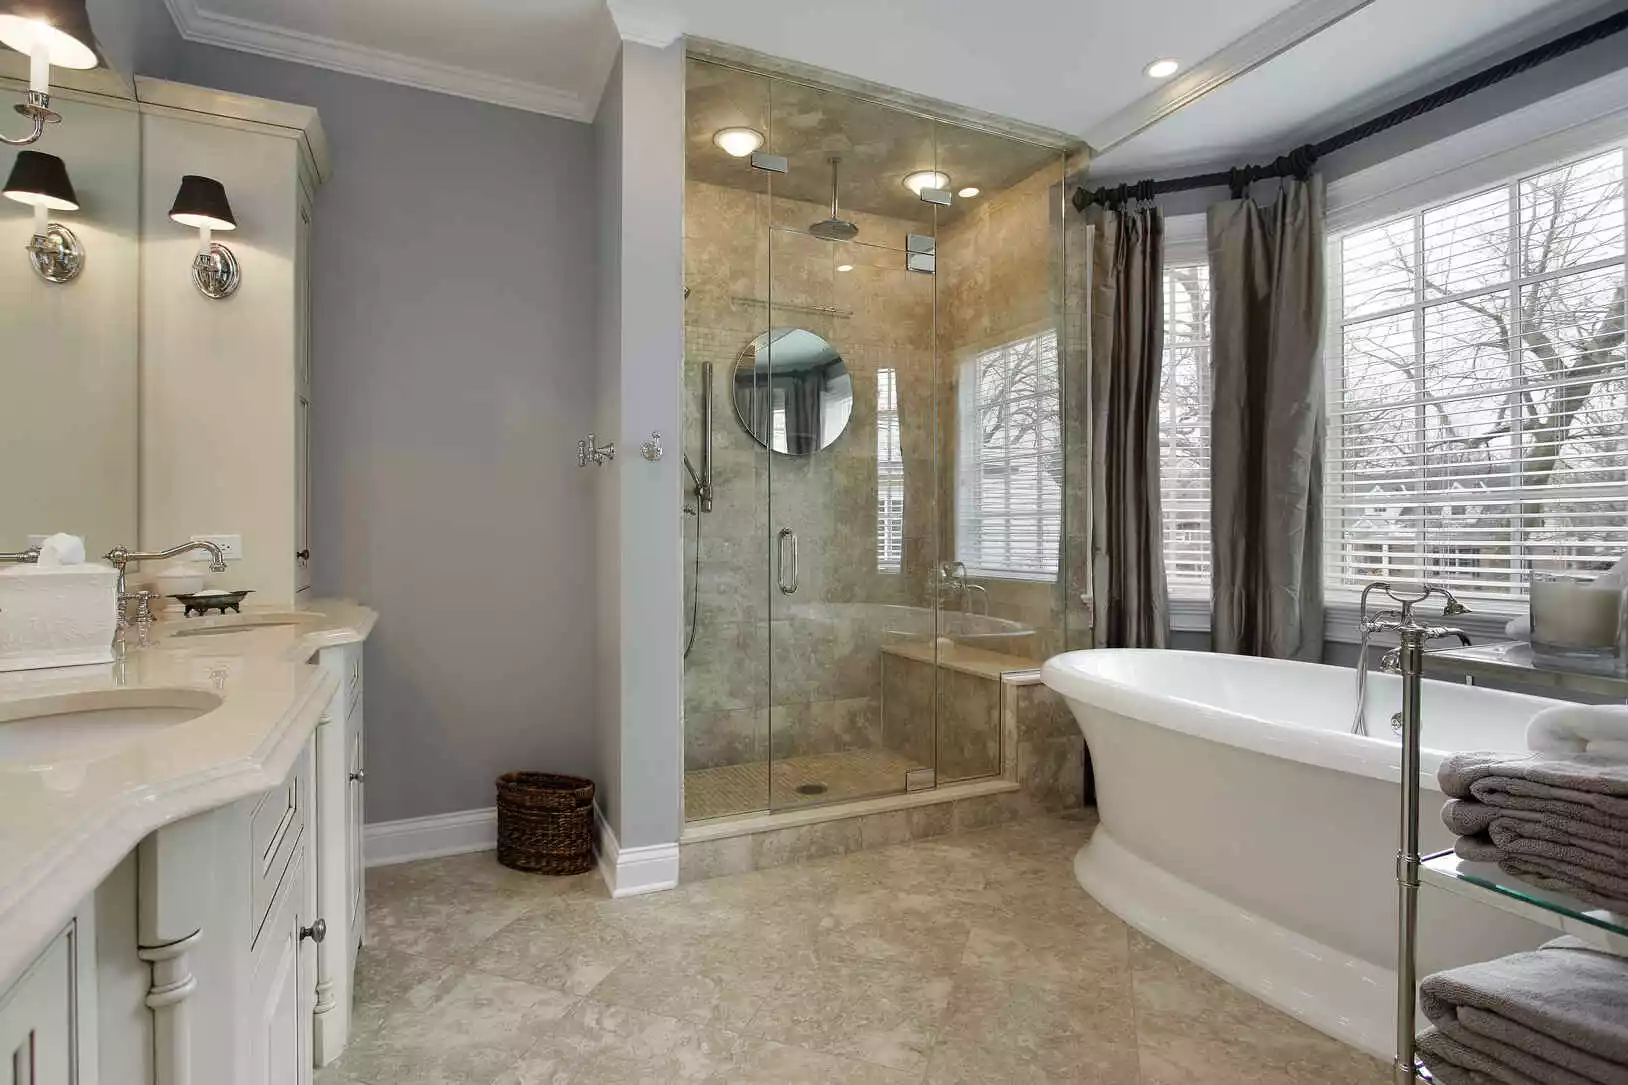 Bathroom remodeling and renovation service near Fayetteville NC